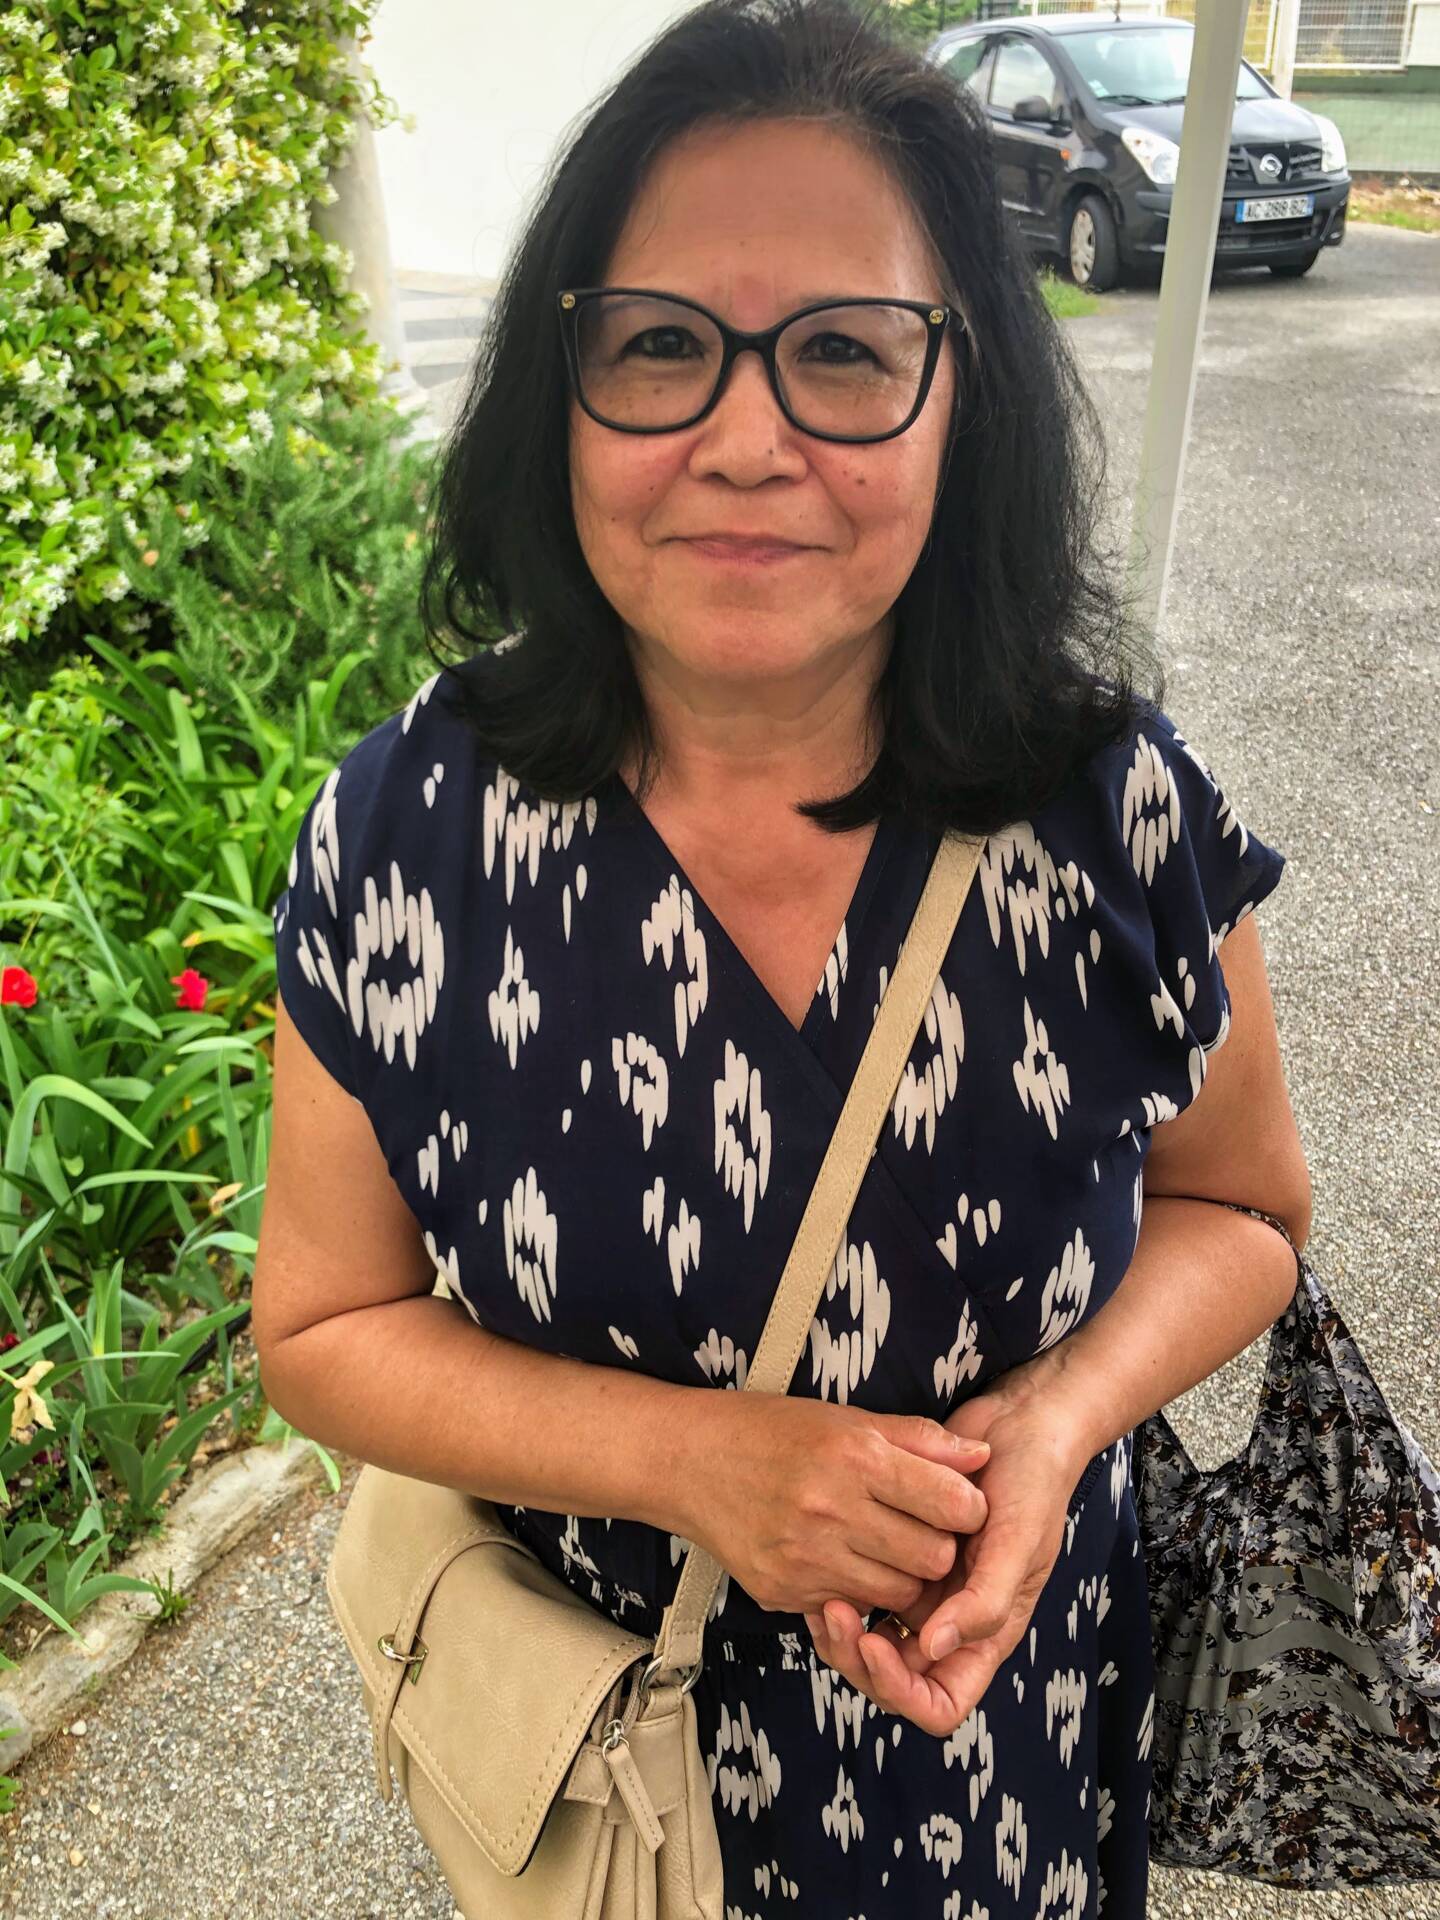 Gisèle Navarro, 67, took a course in French political life from the revolution to the present, during the 2021-2022 school year, at the University of the Côte d'Azur.  Gisèle Navarro, 67, took a course in French political life from the revolution to the present, during the school year 2021-2022, at the University of the Côte d'Azur Gisèle Navarro, 67, took a course in French political life from the revolution to the present, during the school 2021-2022 years, at the University of the Côte d'Azur.